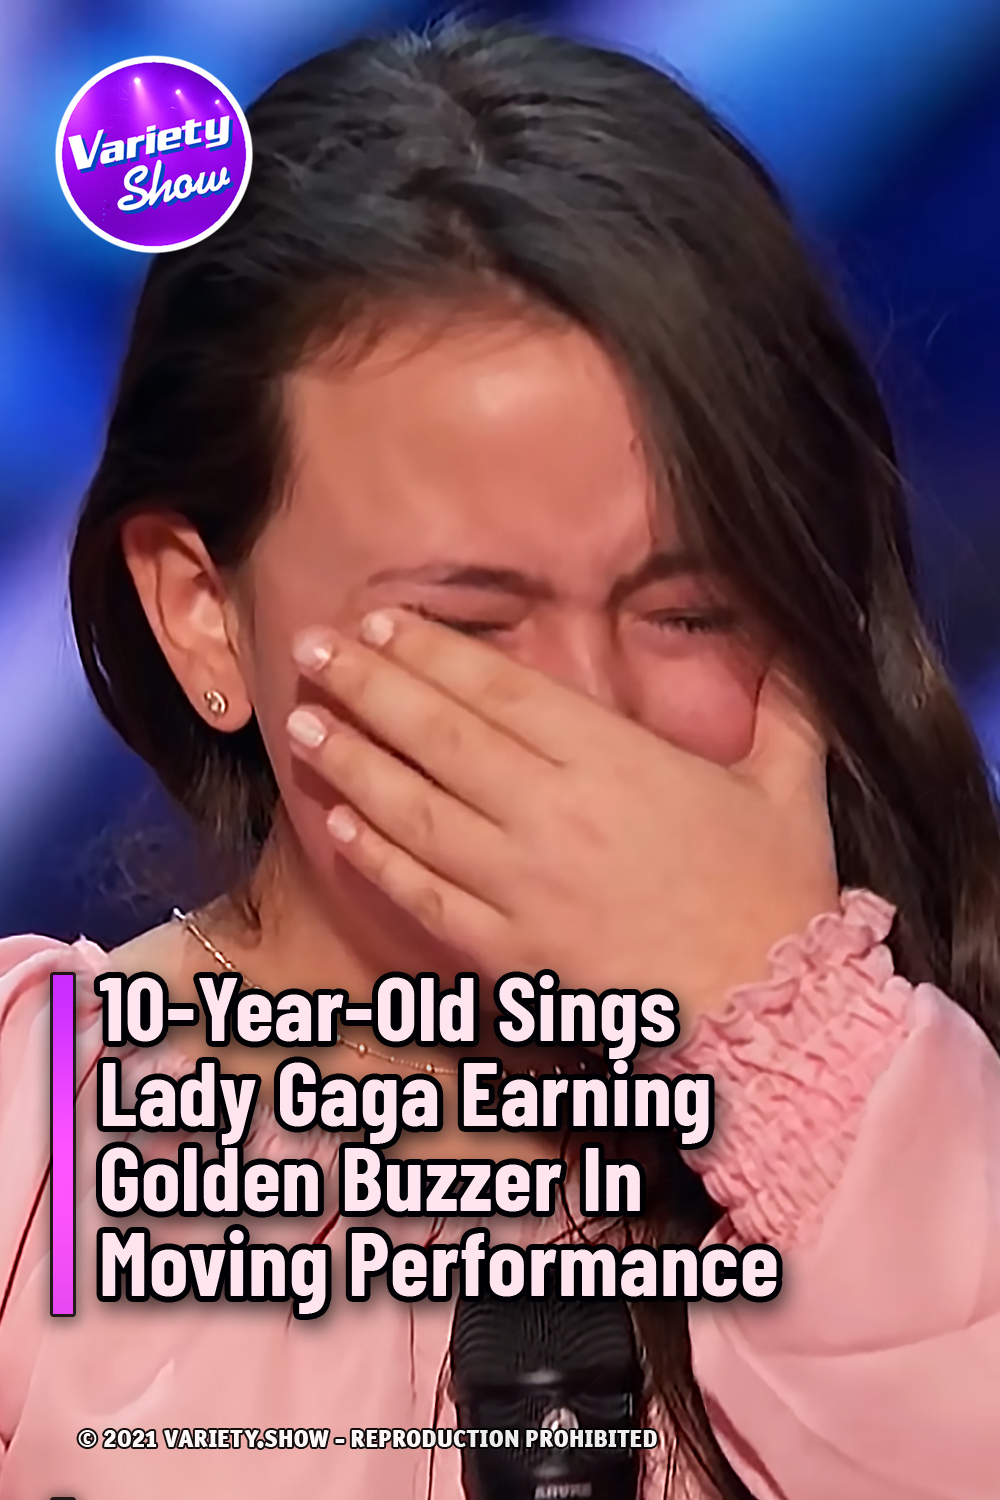 10-Year-Old Sings Lady Gaga Earning Golden Buzzer In Moving Performance